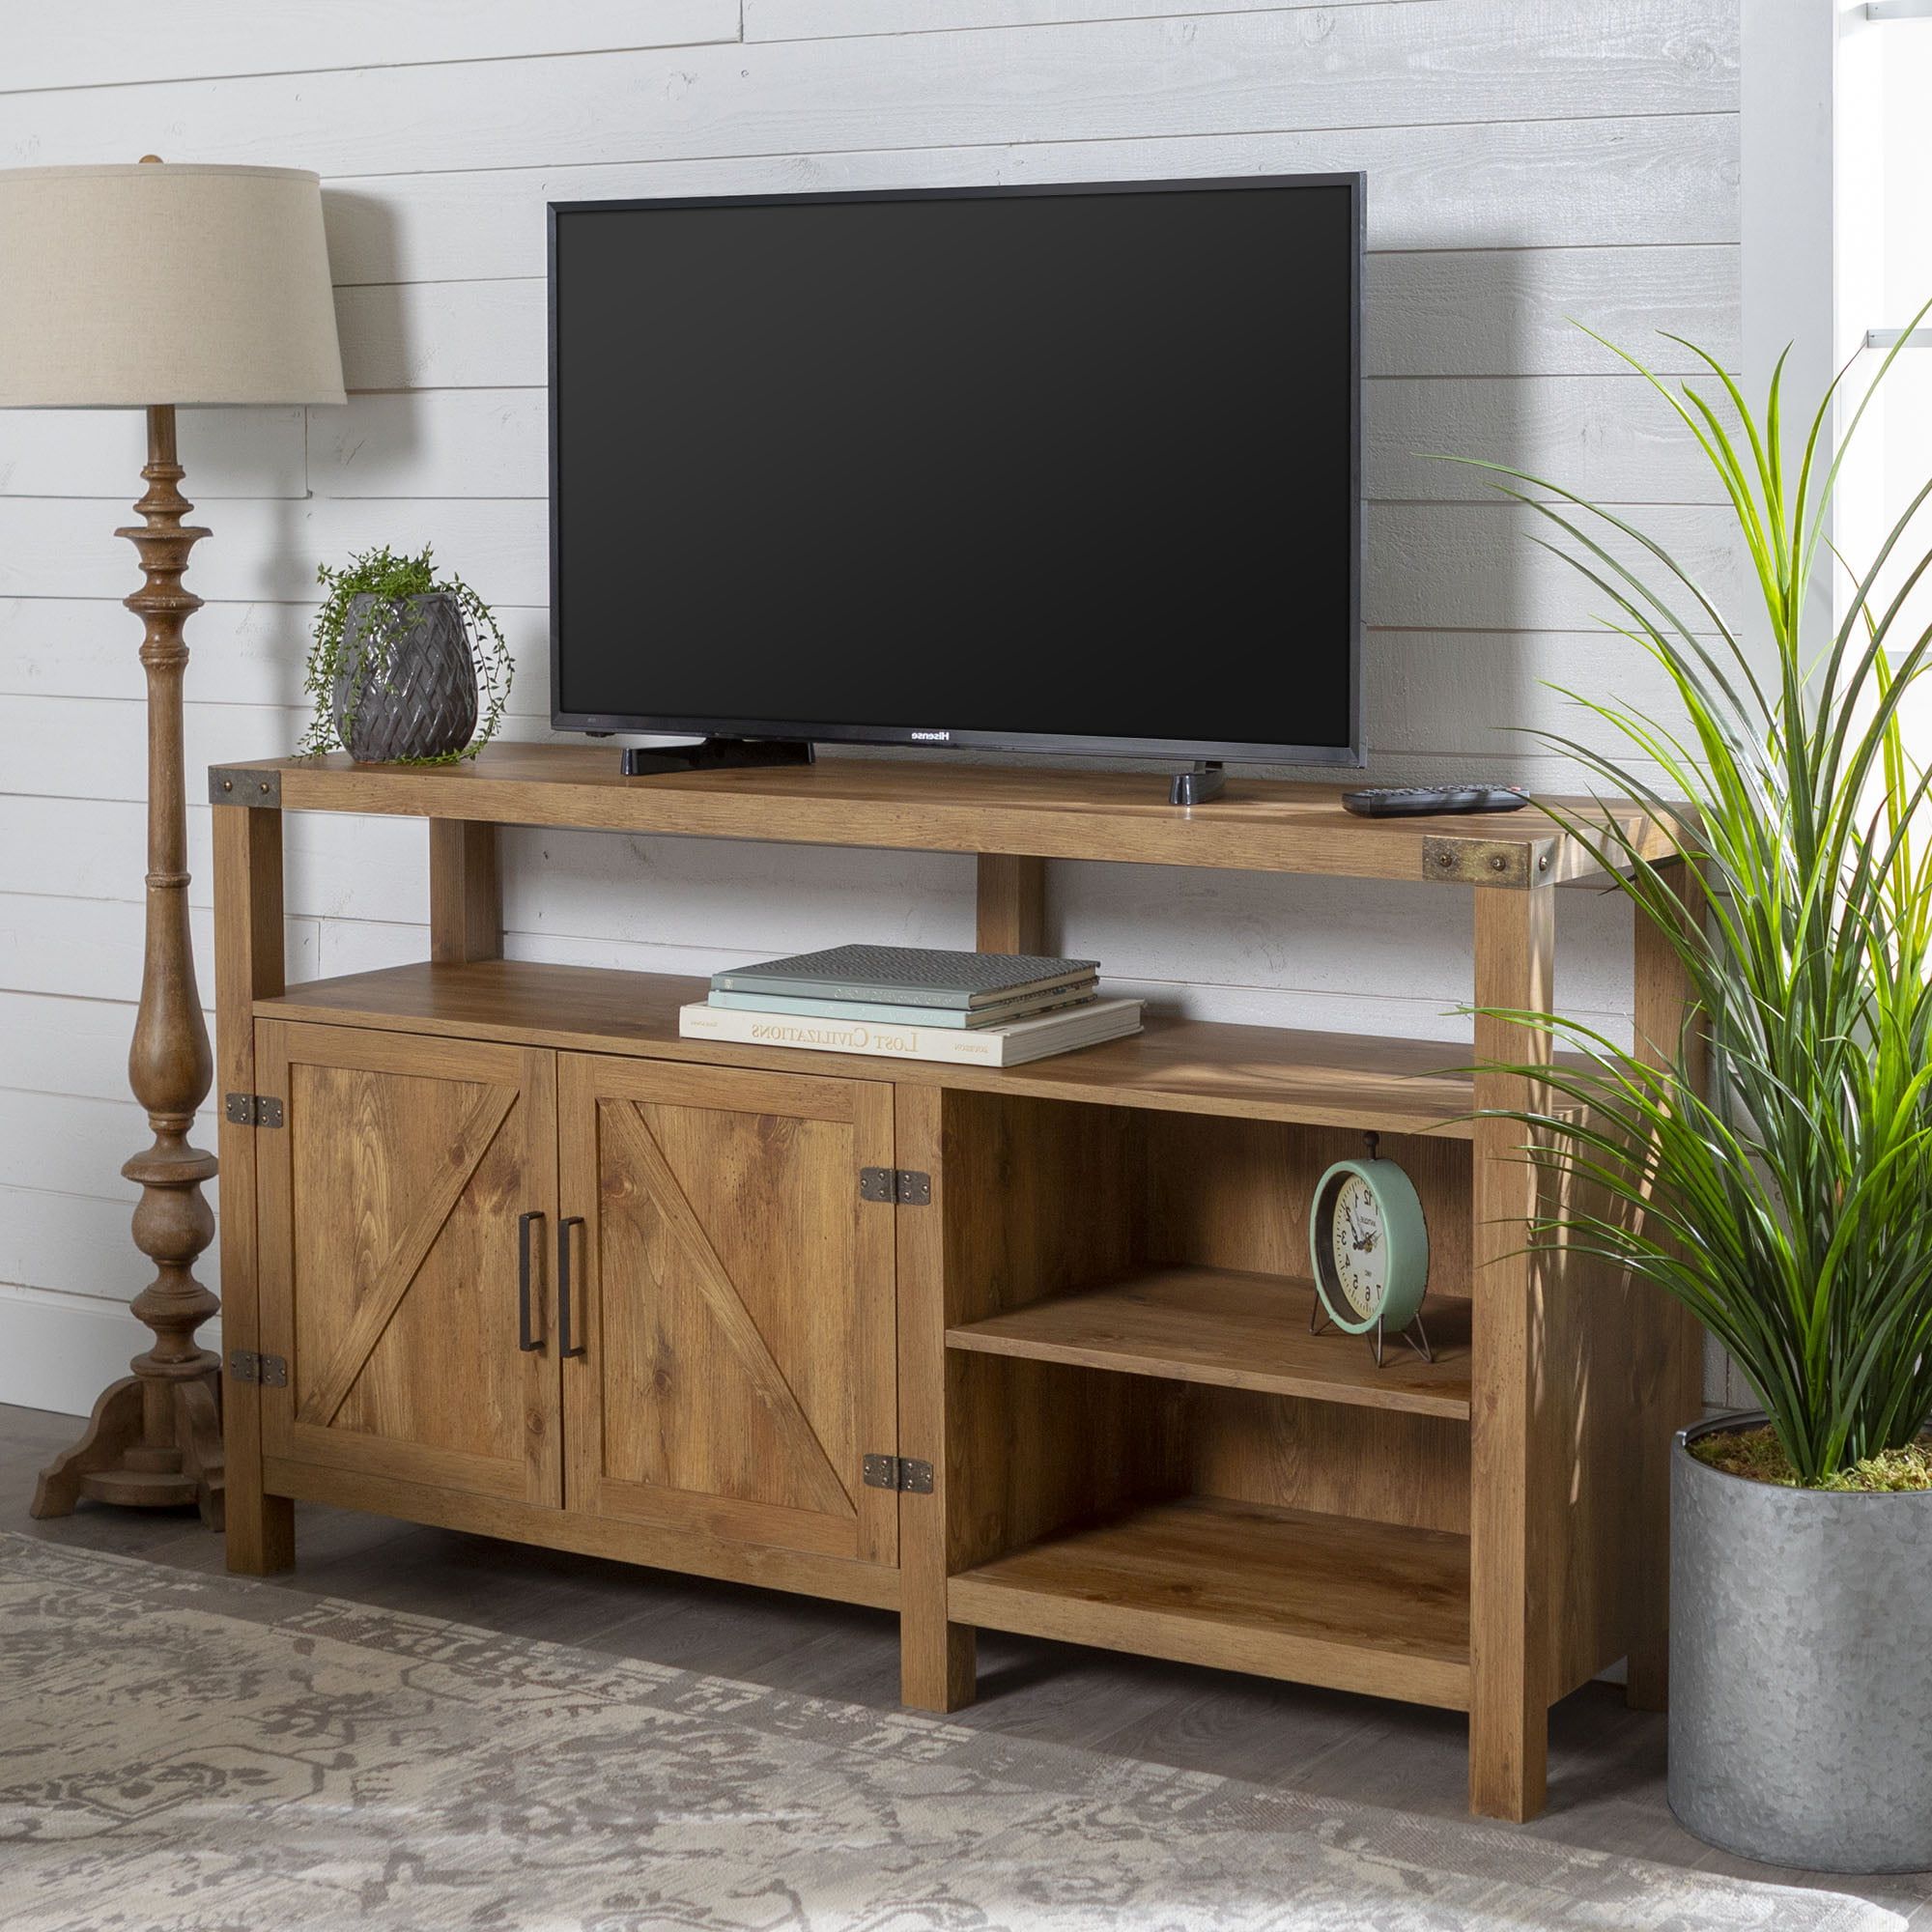 Latest Woven Paths Modern Farmhouse Highboy Tv Stand For Tvs Up To 65 Pertaining To Modern Farmhouse Barn Tv Stands (View 6 of 15)